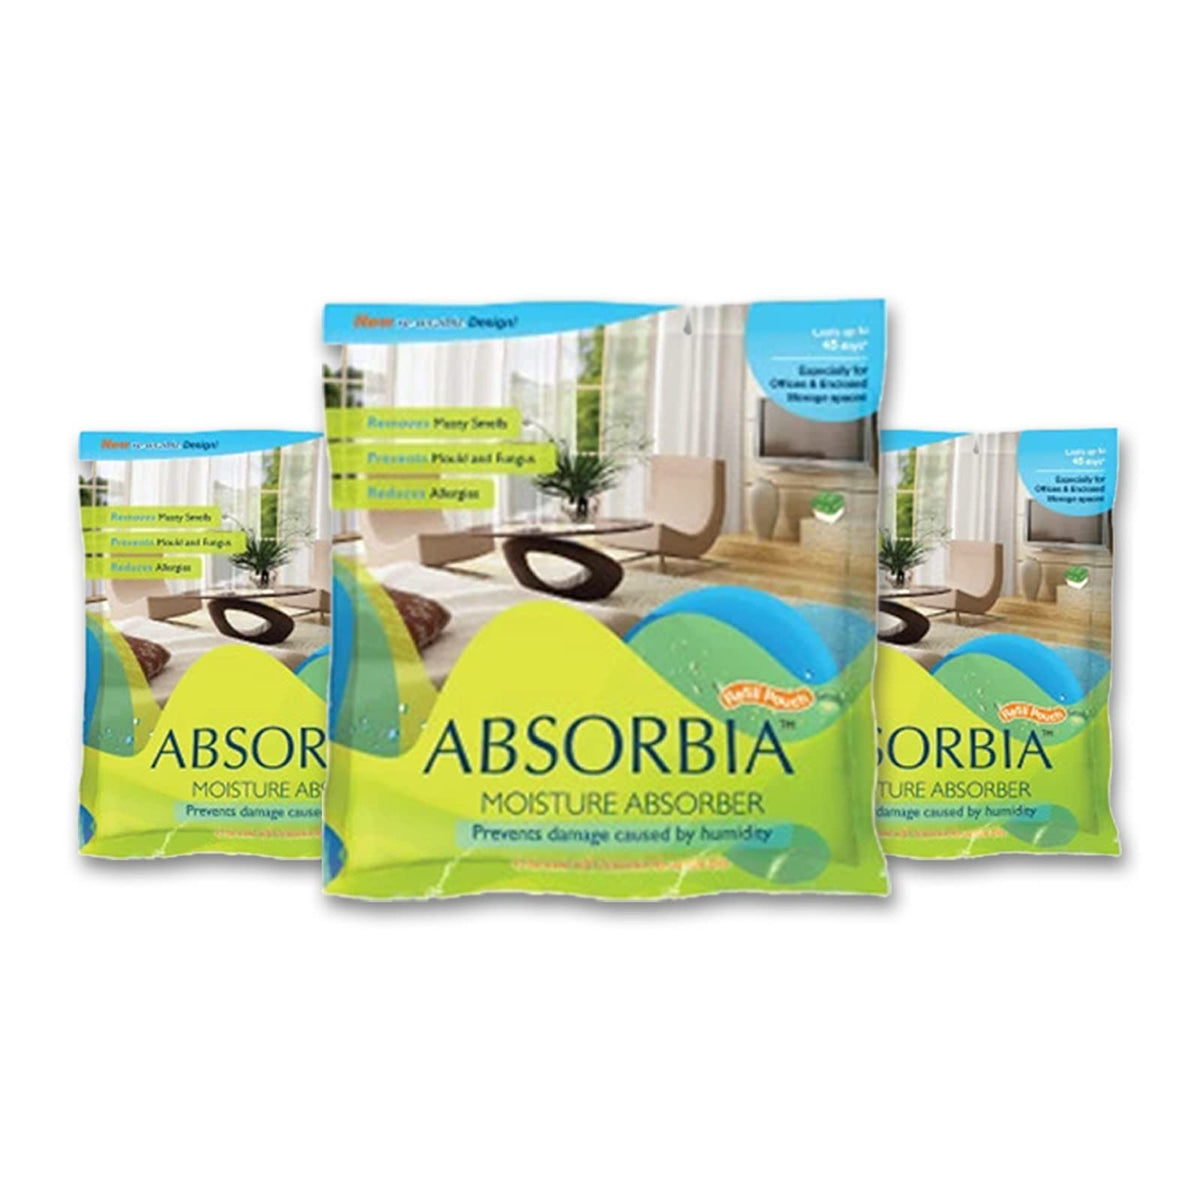 Absorbia Moisture Absorber | Absorbia Refill Pouch for Reusable Box - Pack of 24 (800ml Each) | Dehumidifier for Larger Areas Rooms| Fights Against Moisture, Mould, Fungus Musty Smells